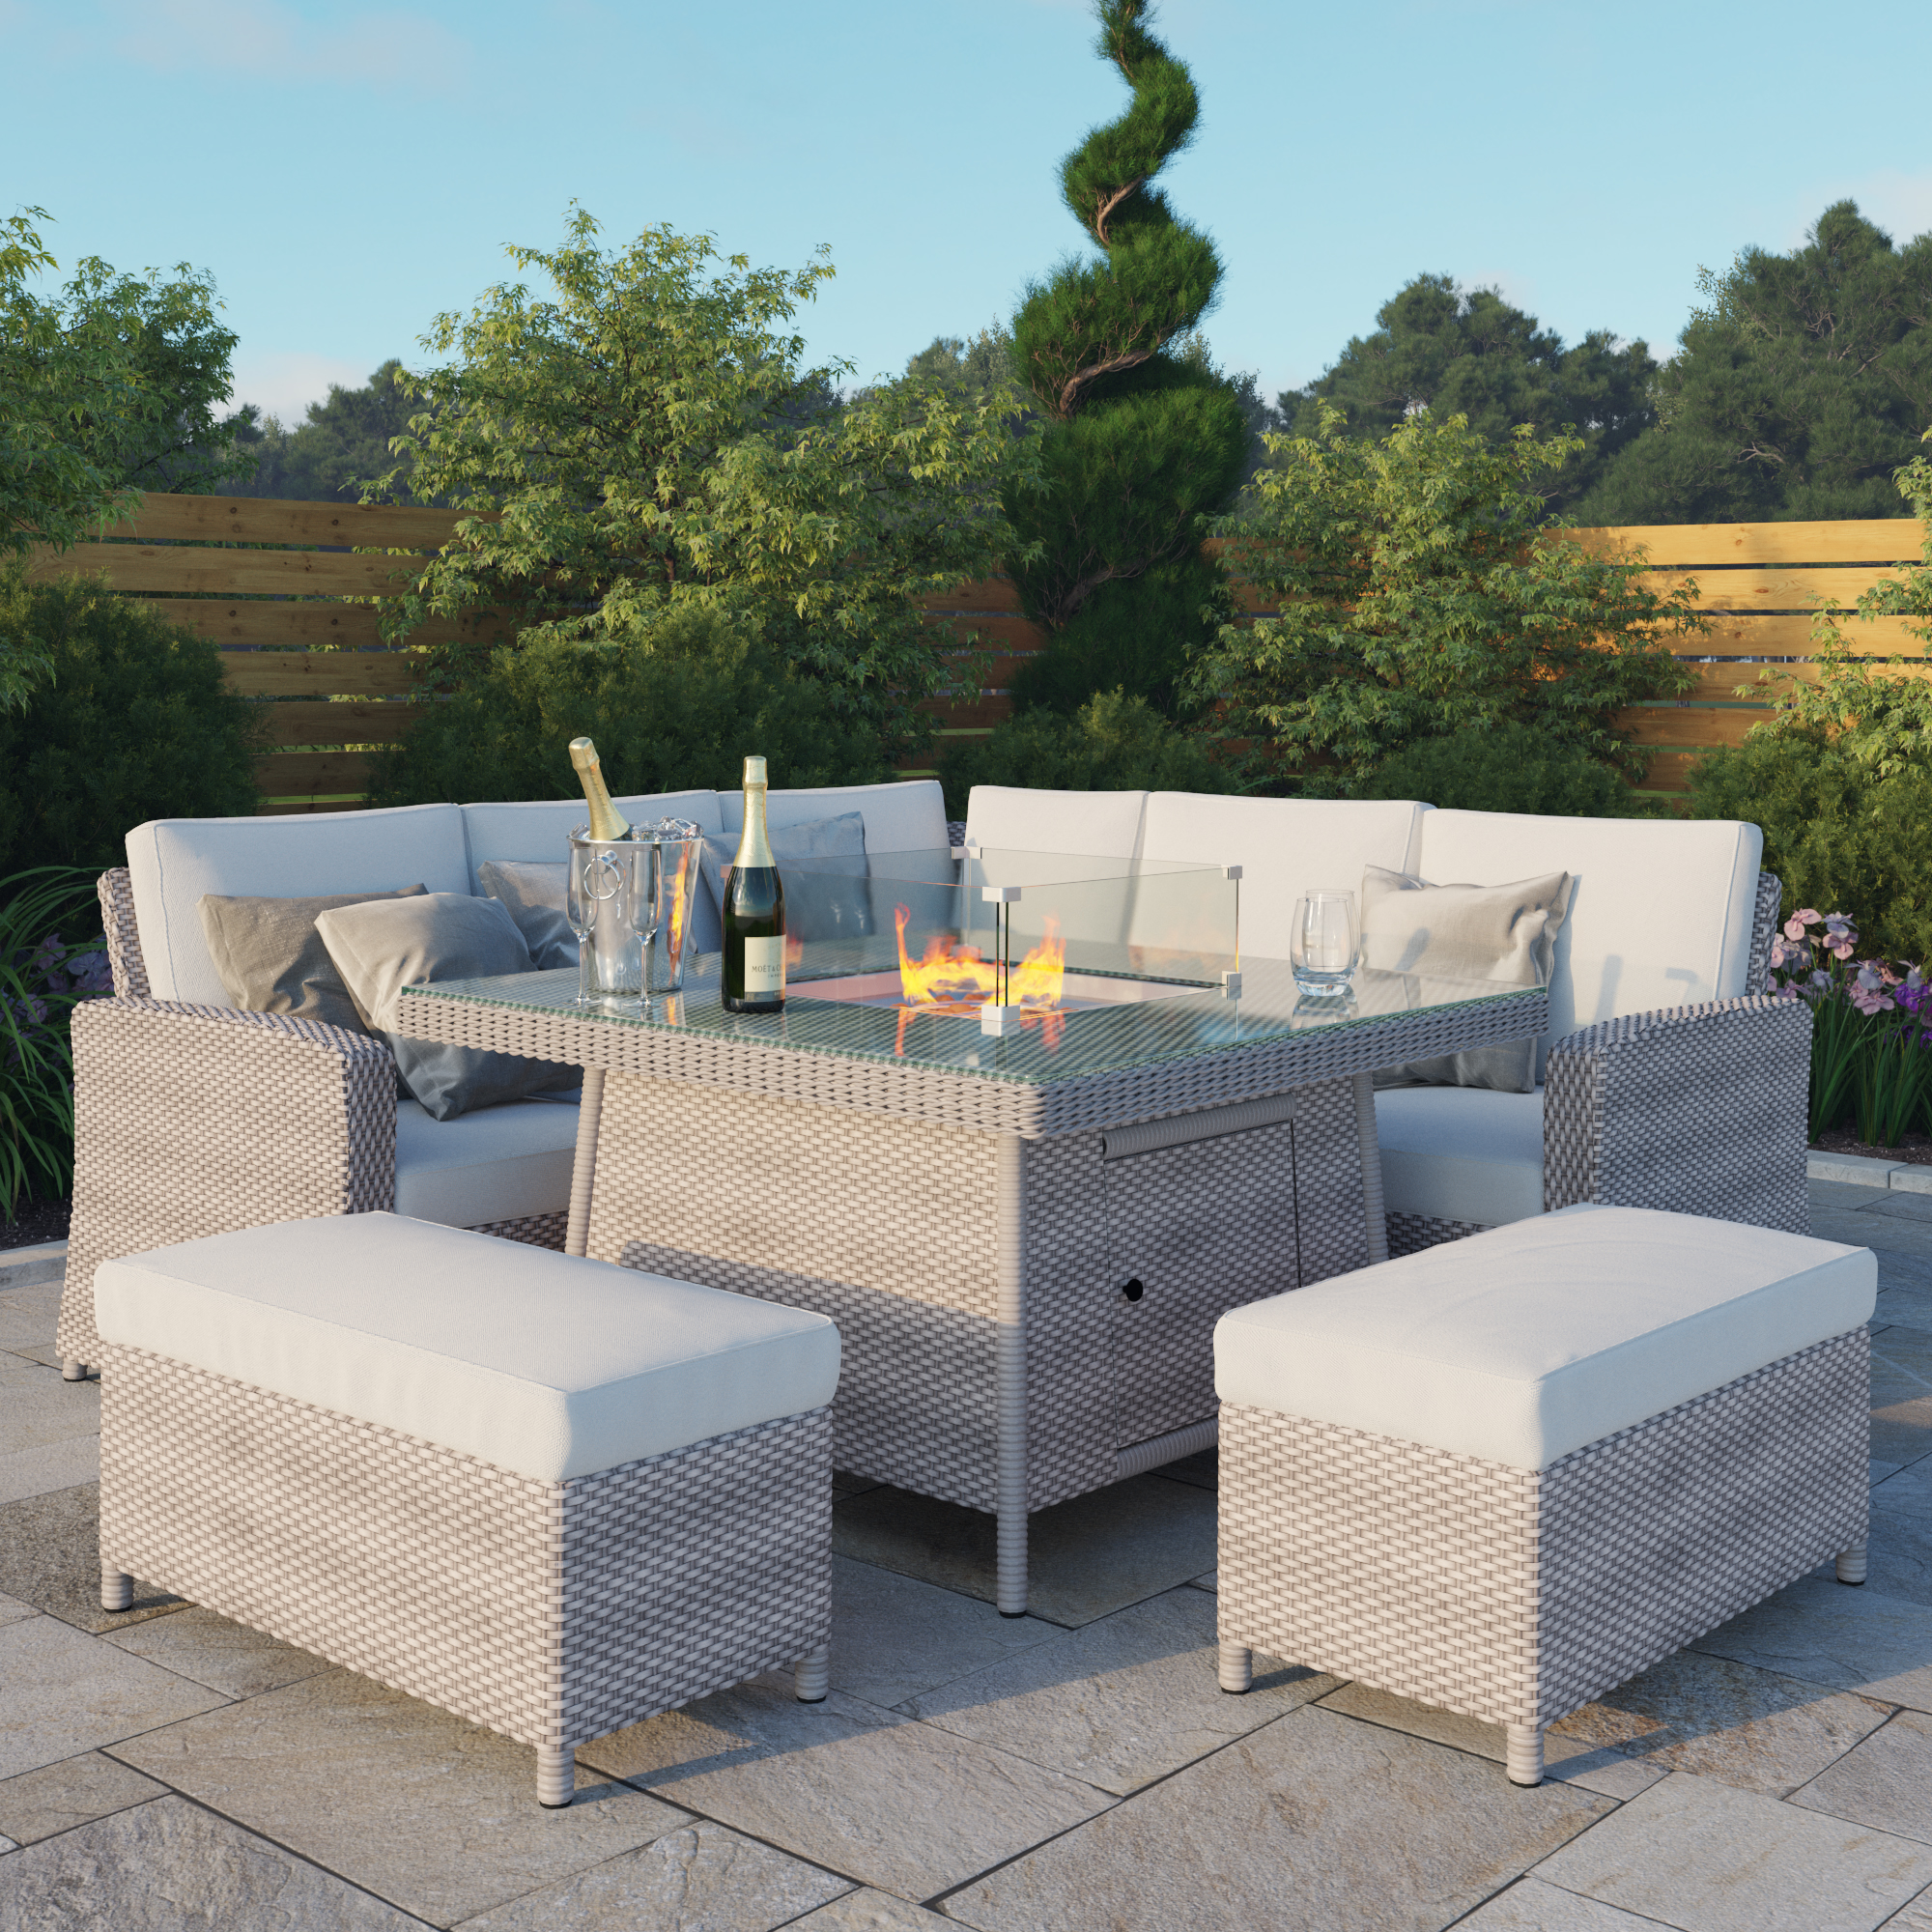 BillyOh Capri Rattan Garden Corner Sofa Set with Firepit Table - L-Shaped Rattan With 2 Benches and Firepit